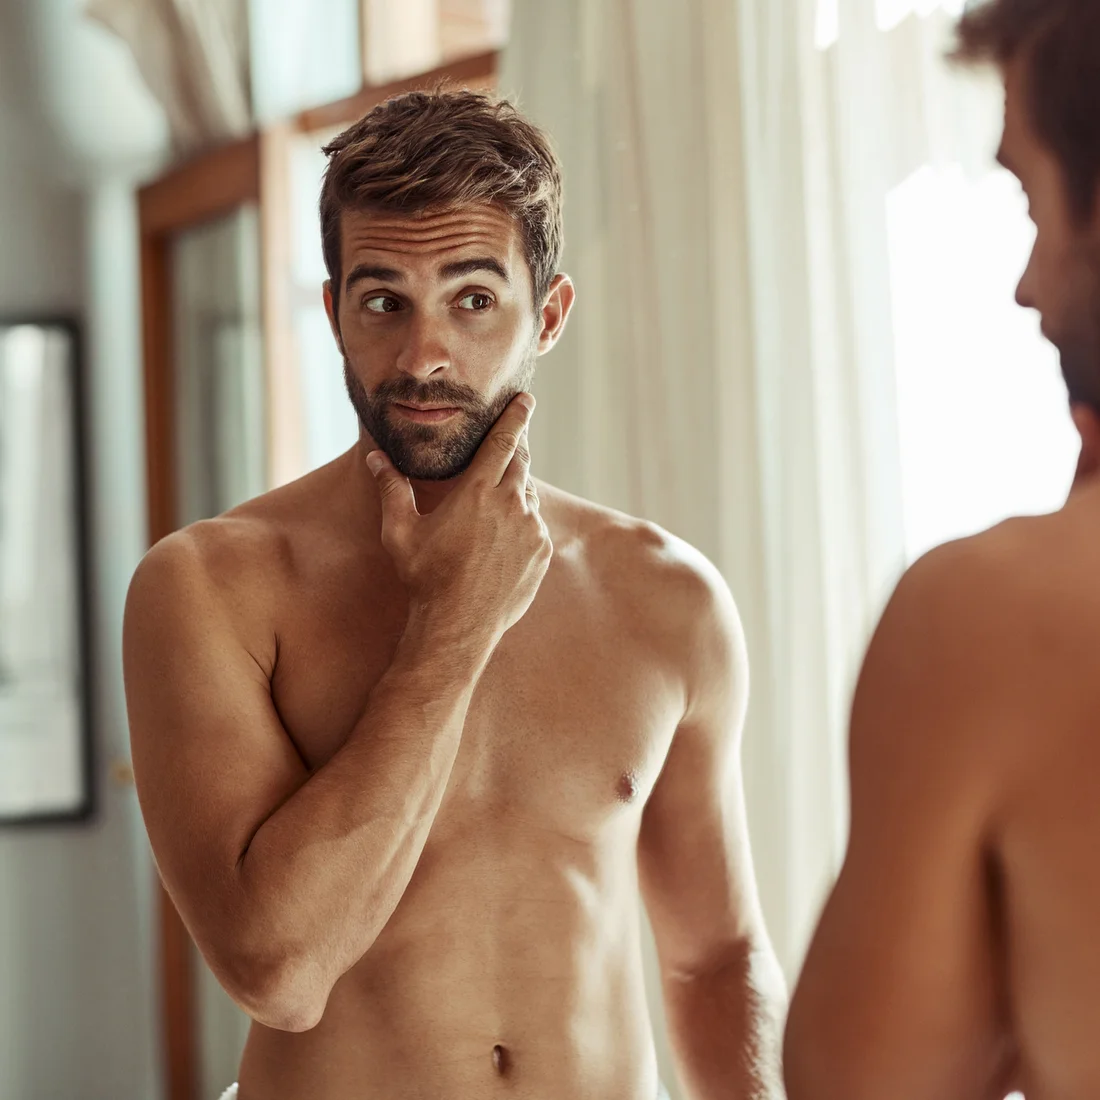 Bare-chested man touching jaw and looking in the mirror